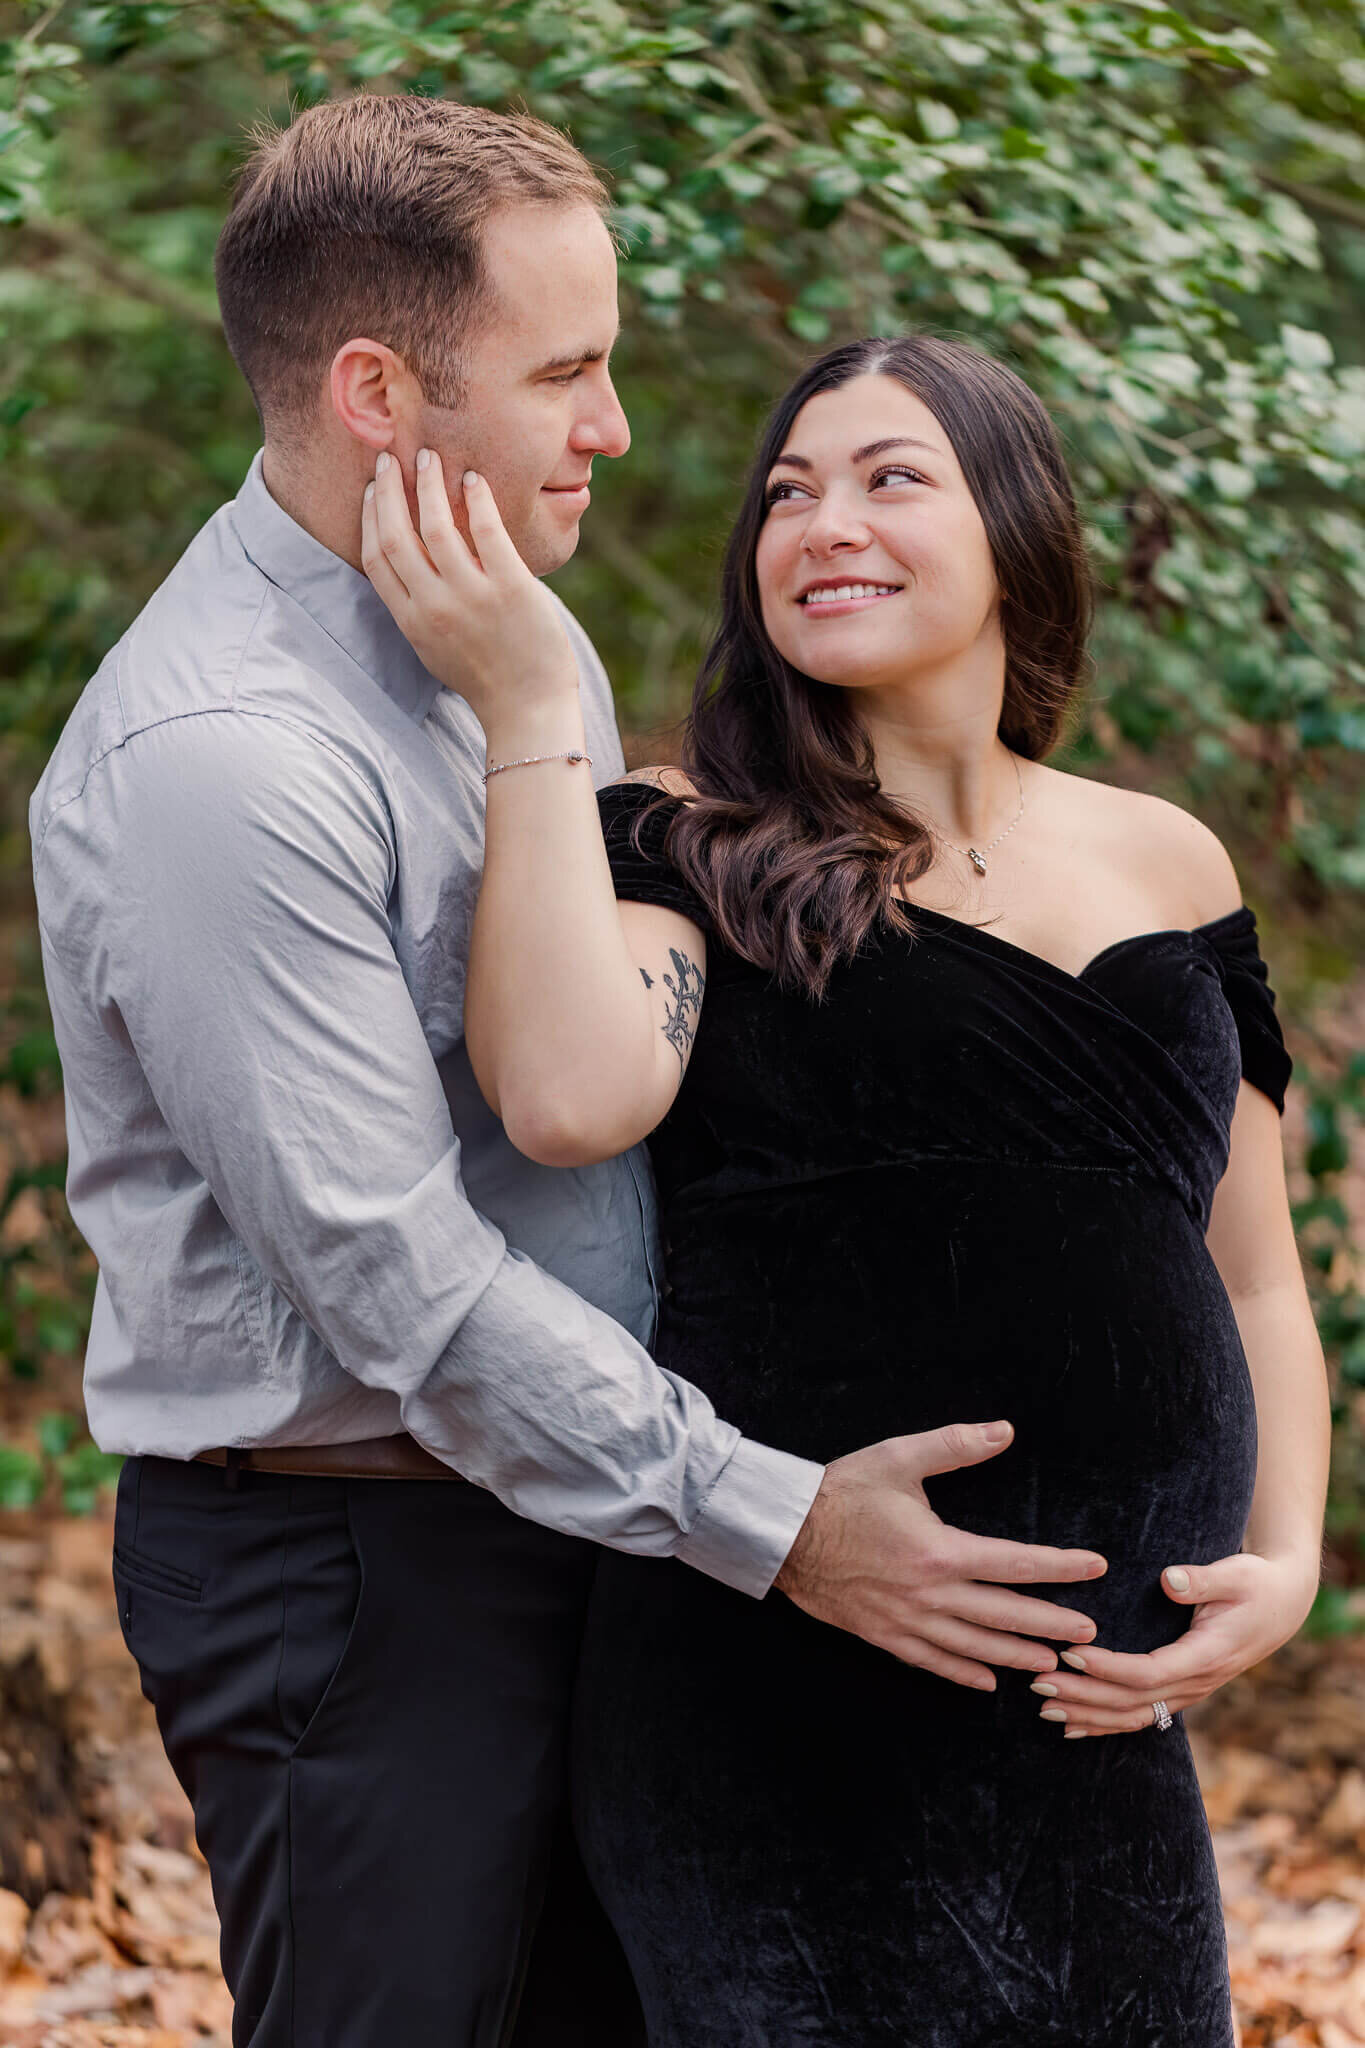 A couple embracing in a Burke, Virginia park during their maternity session.